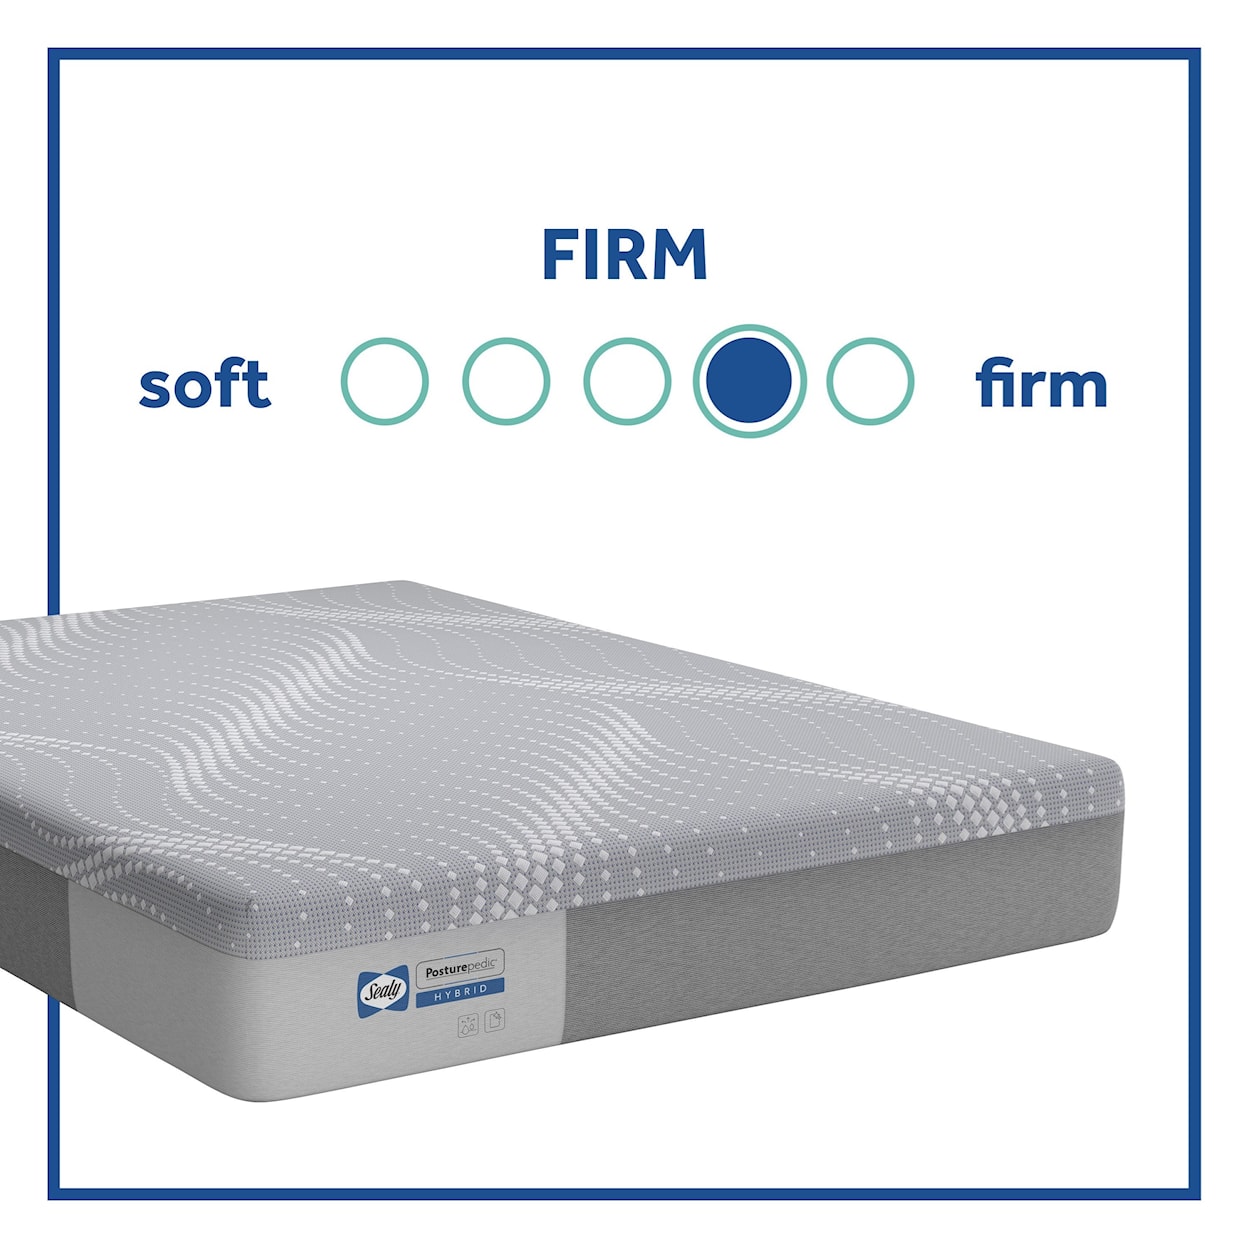 Sealy PPH1 Posturpedic Hybrid Firm Twin 11" Firm Hybrid Low Profile Set